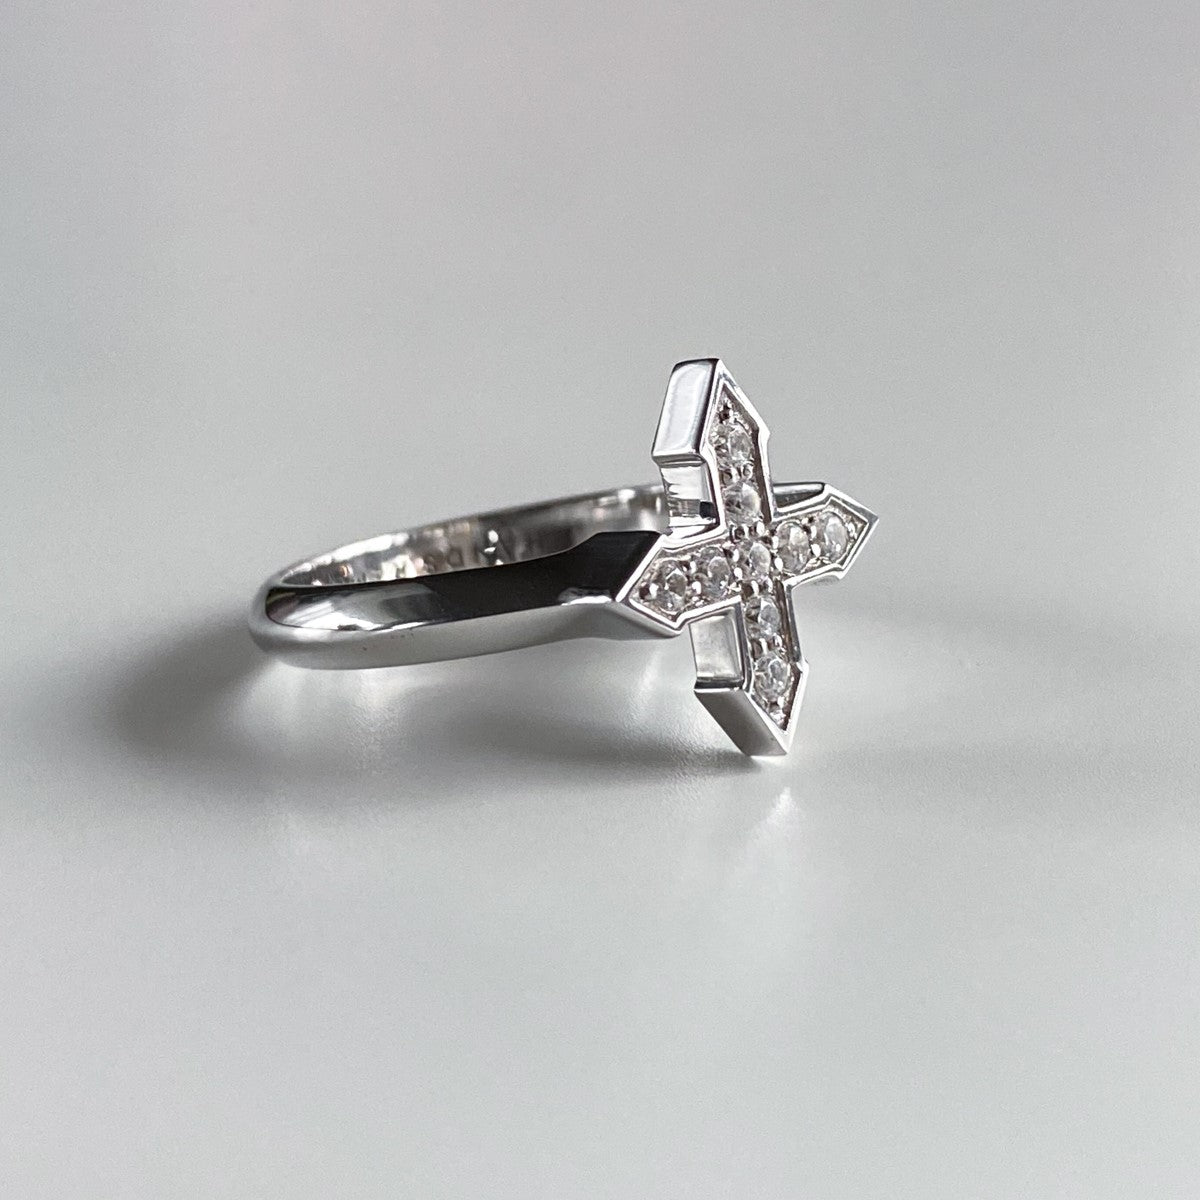 RING STAR "GLOW" WITH MOISSANITE / SILVER